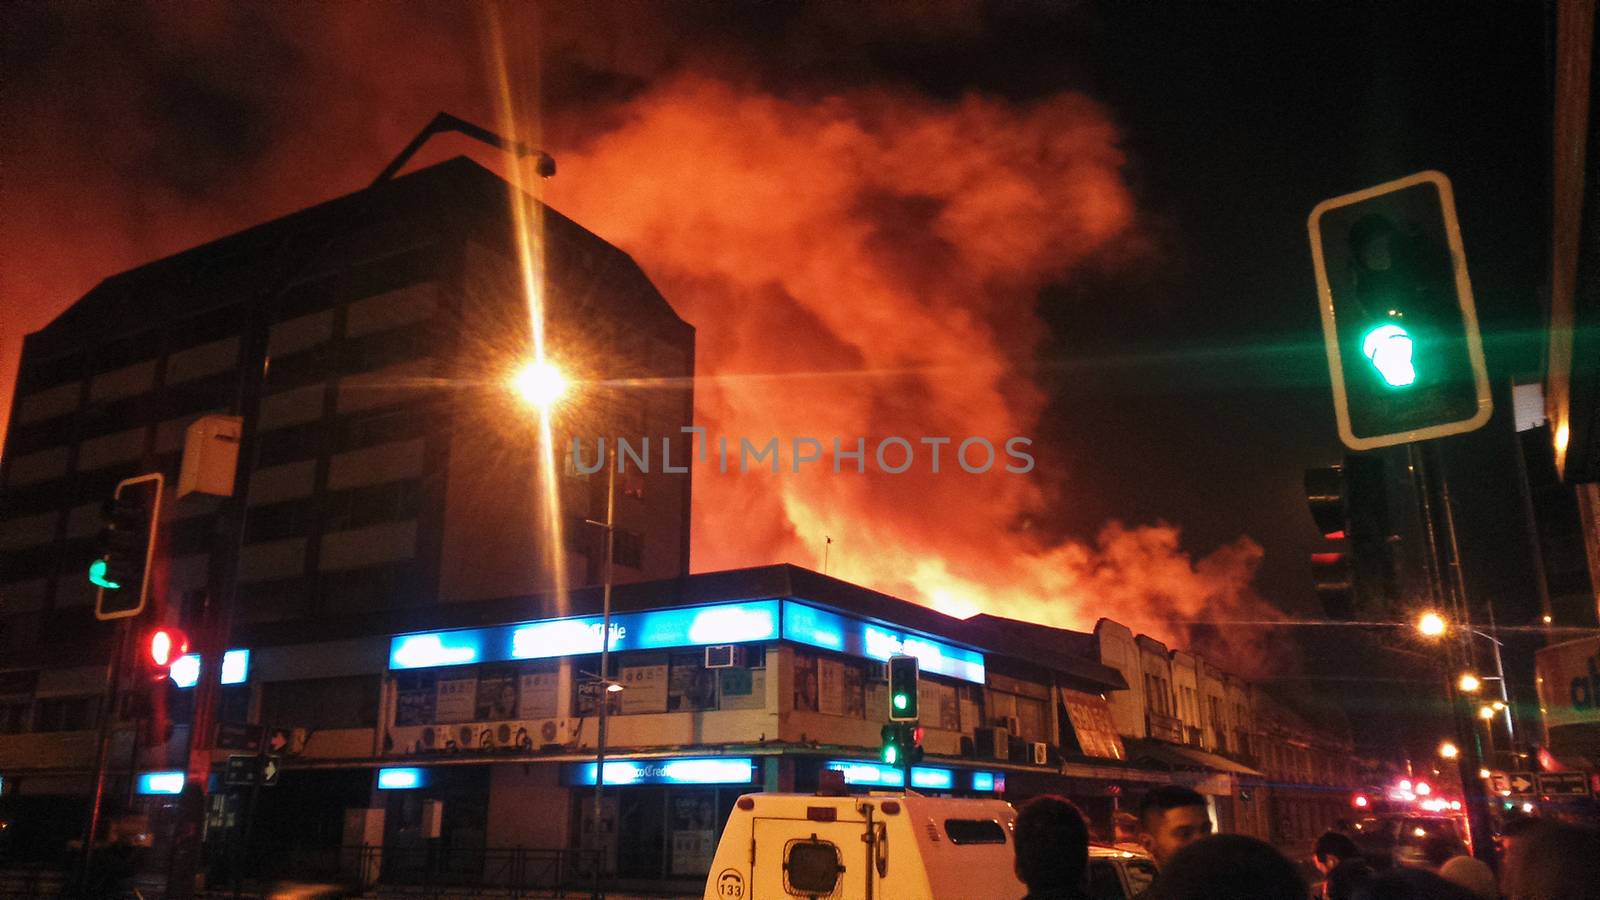 CHILE, Temuco: A massive fire hits the municipal market of Temuco, in the Cautin province, southern Chile, on the evening of April 20, 2016. At least two firefighters have been injured as over 400 people worked to evacuate nearby residents.